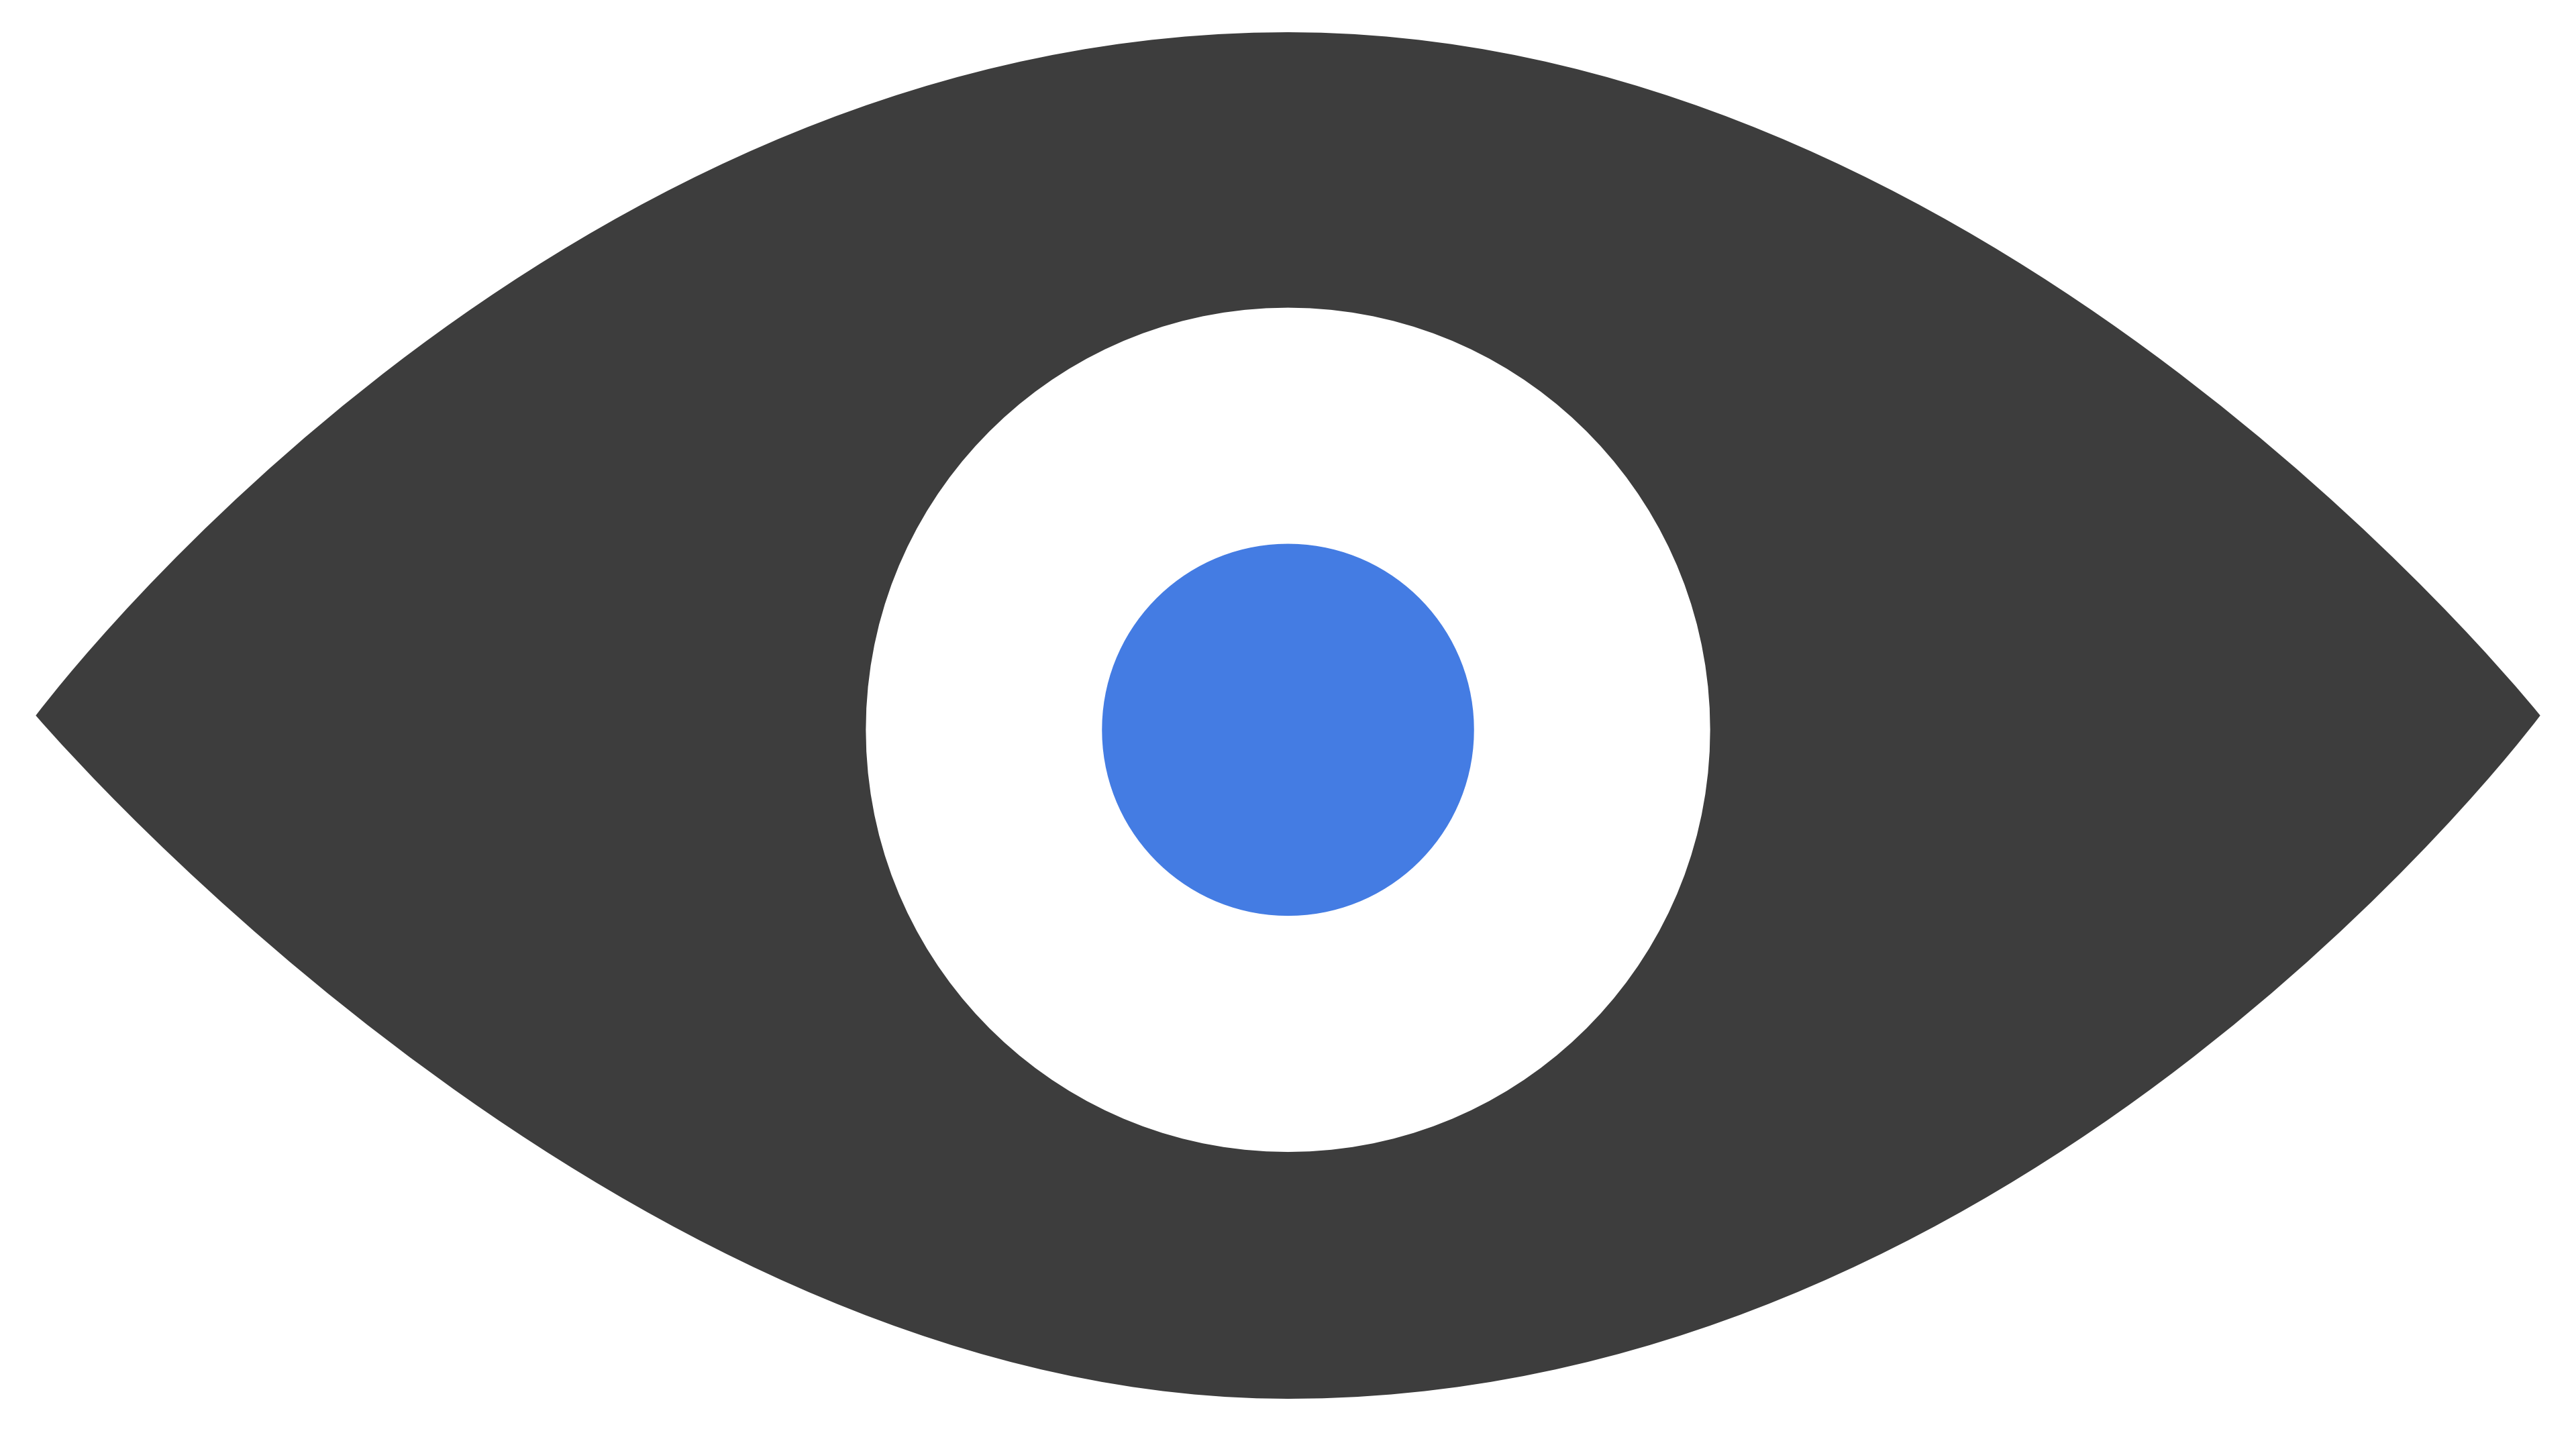 Oculus Logo - I made an SVG of the Oculus eye logo grey in the logo is